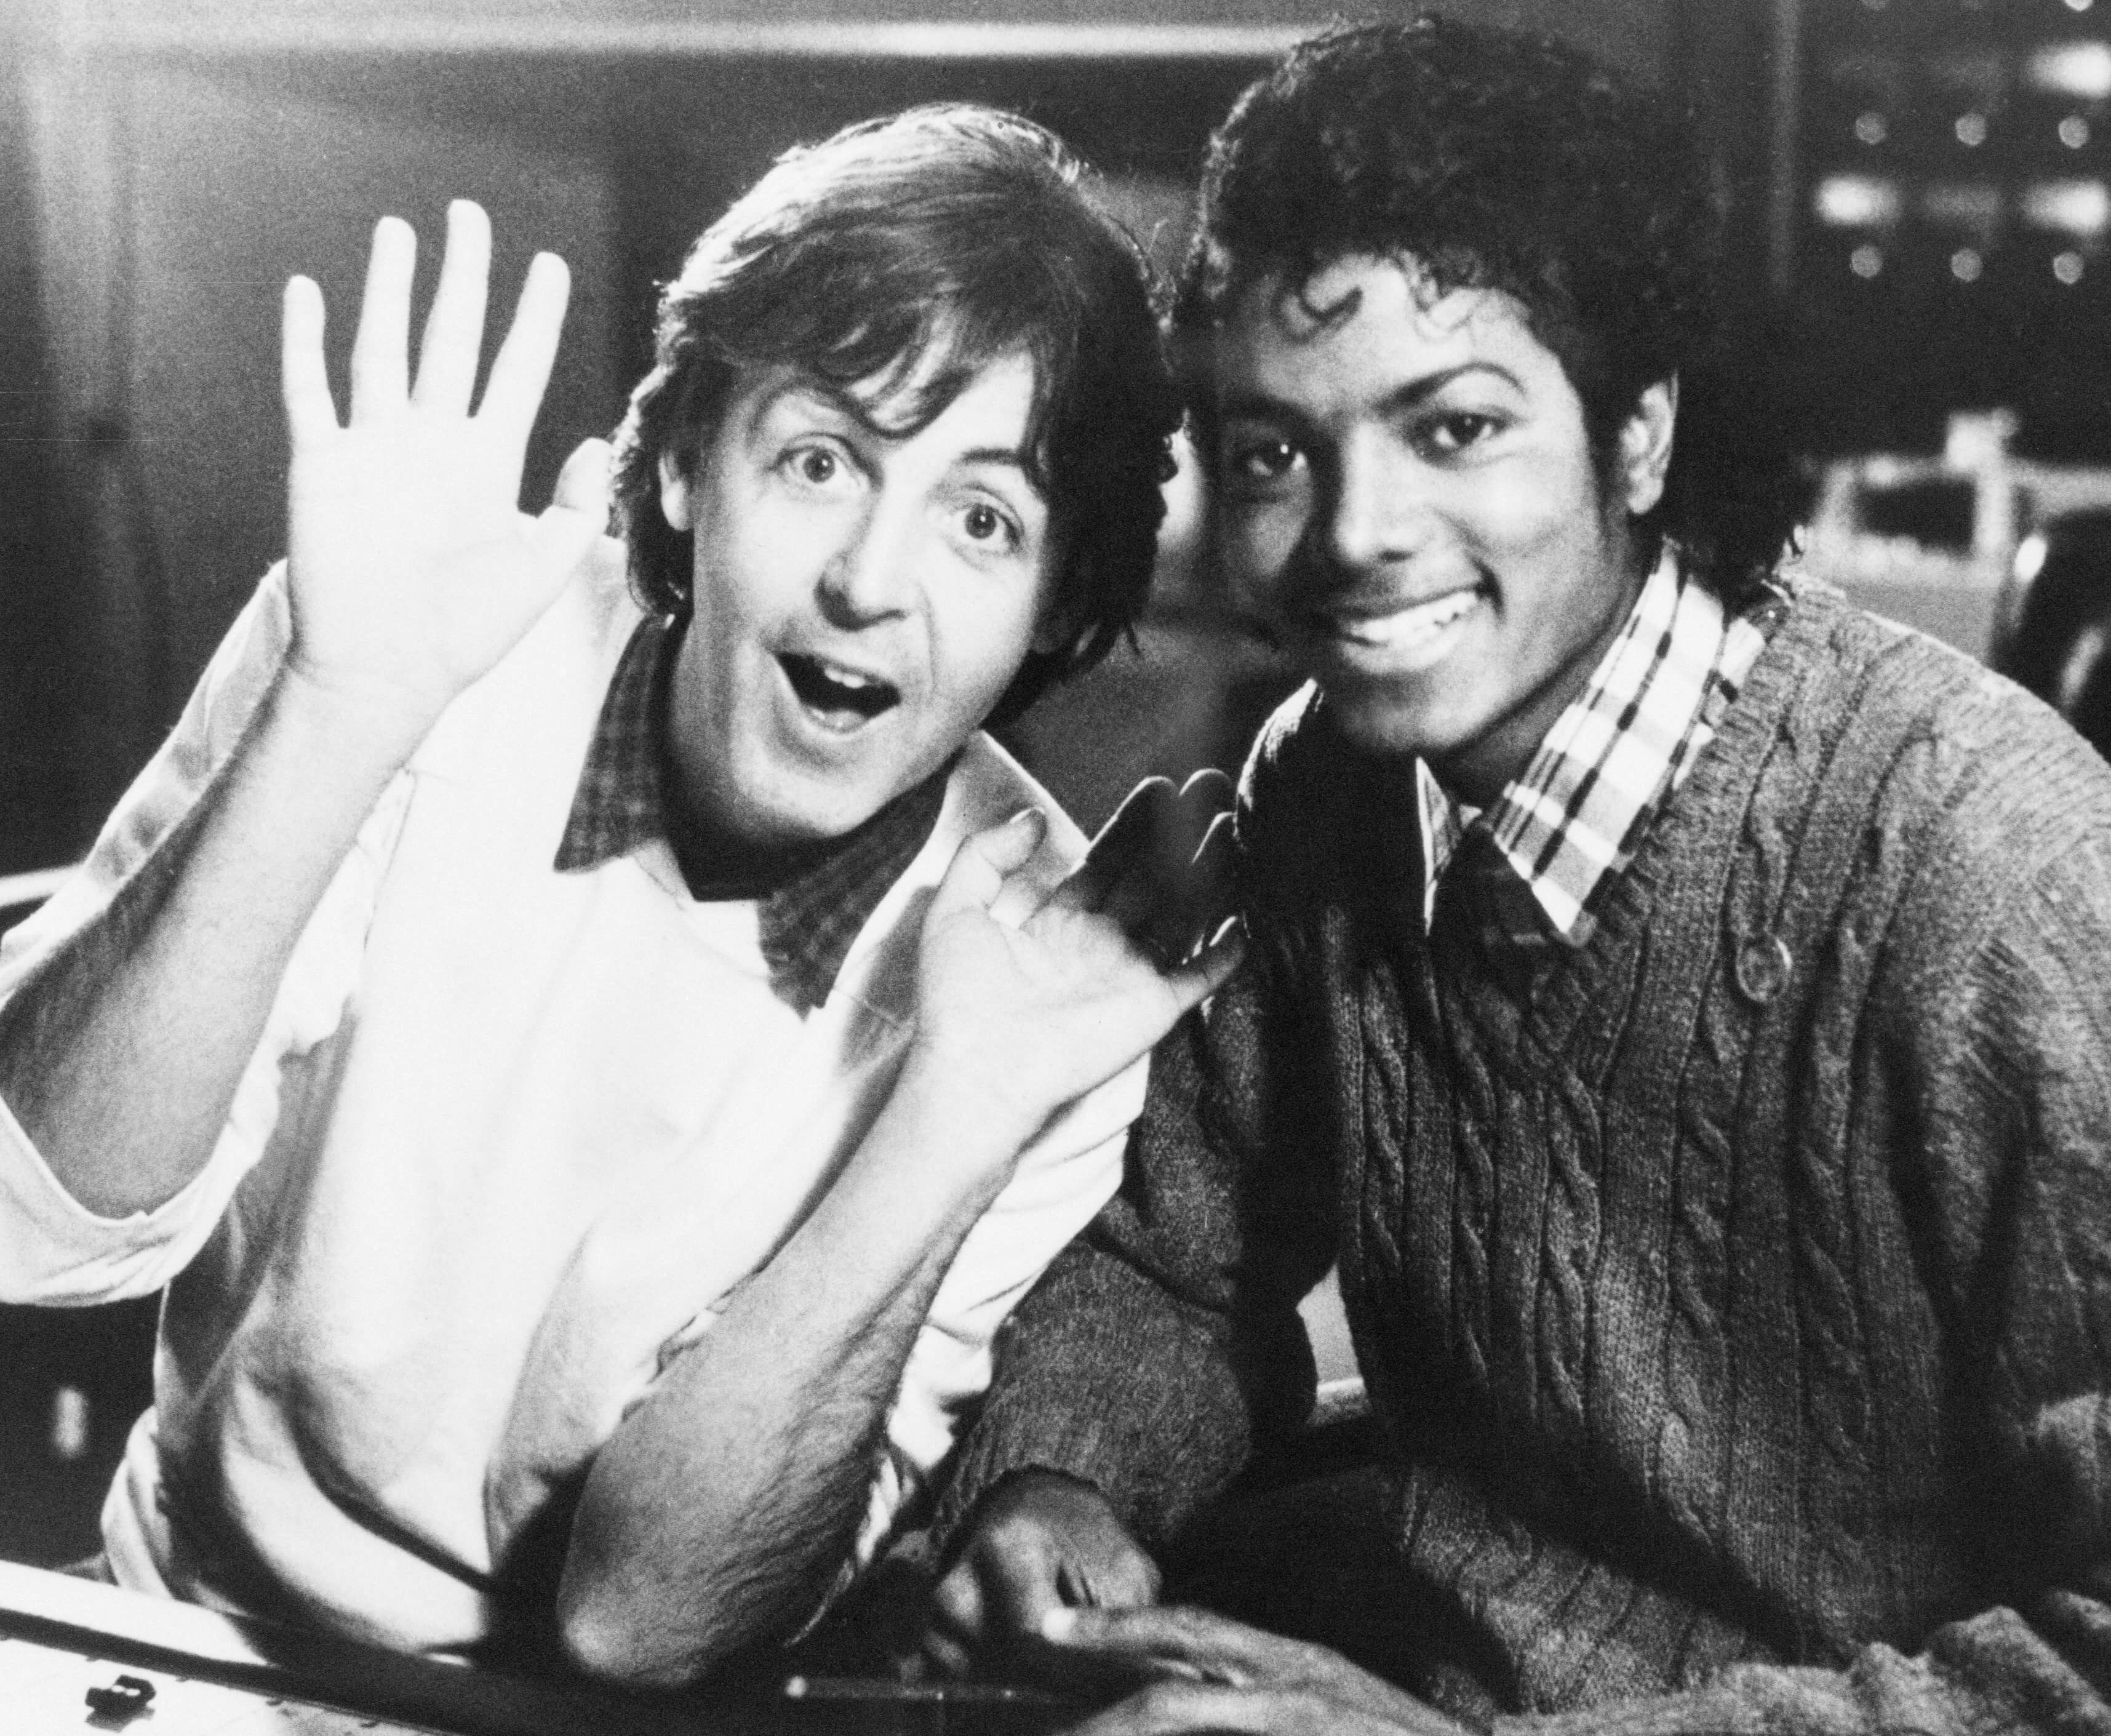 "The Girl Is Mine" singers Paul McCartney and Michael Jackson in black-and-white